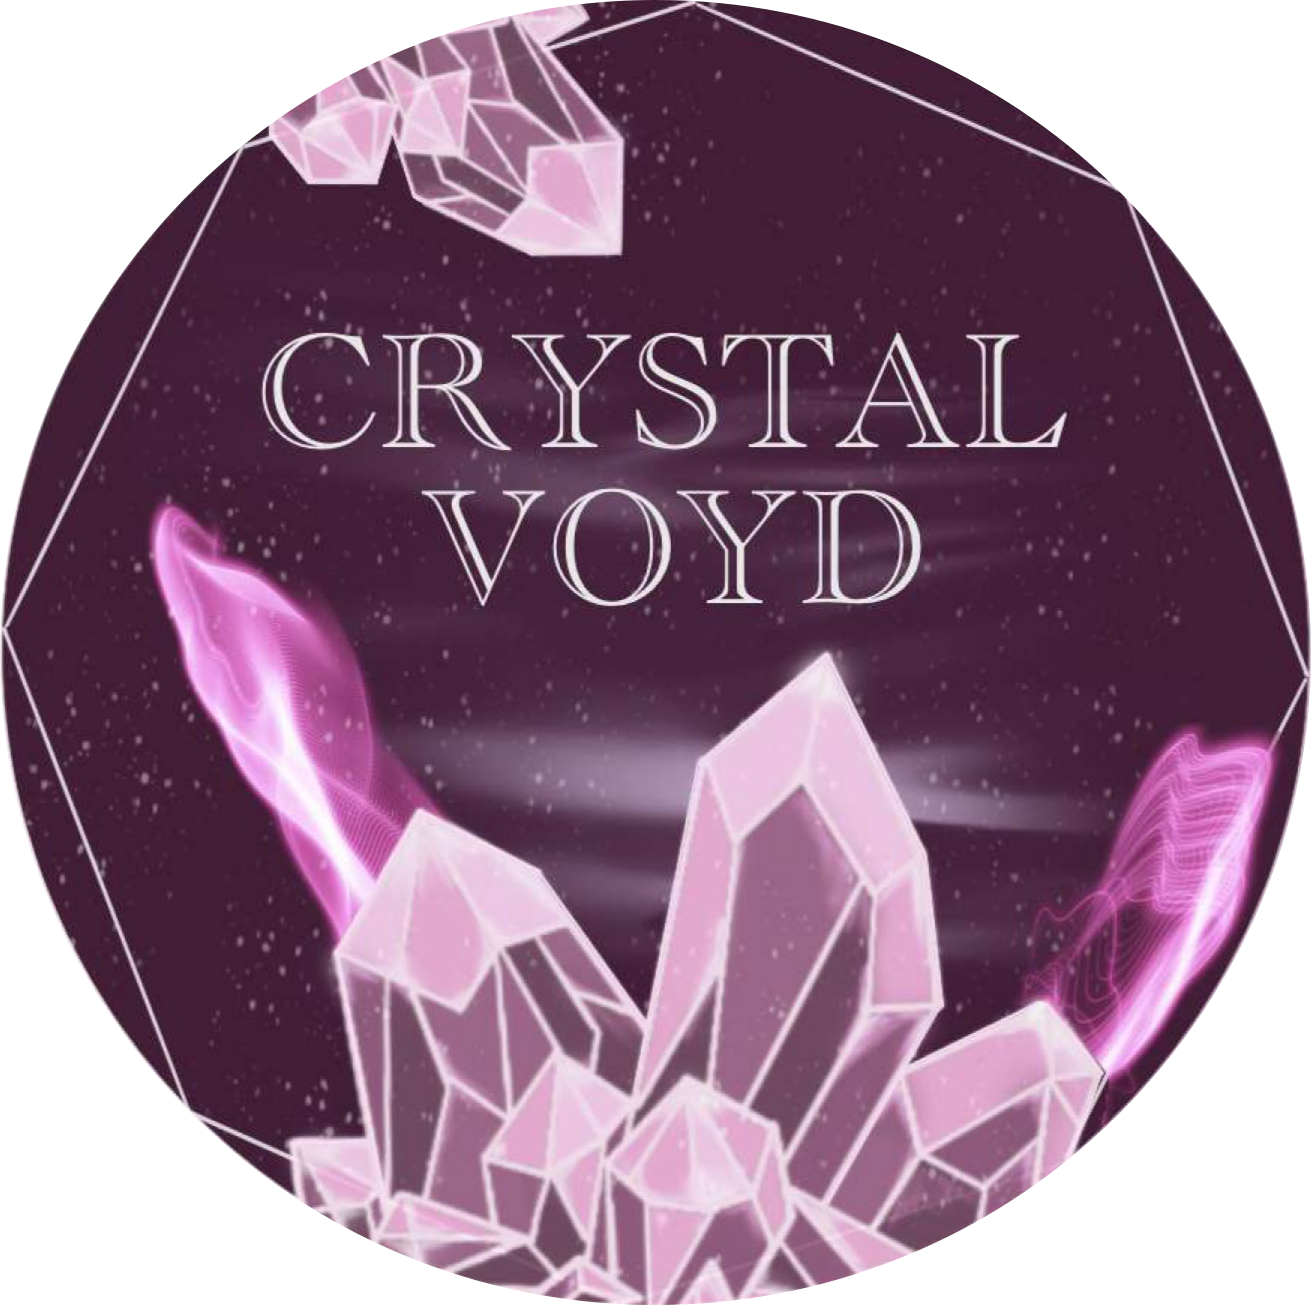 Upcoming events with Crystal Voyd